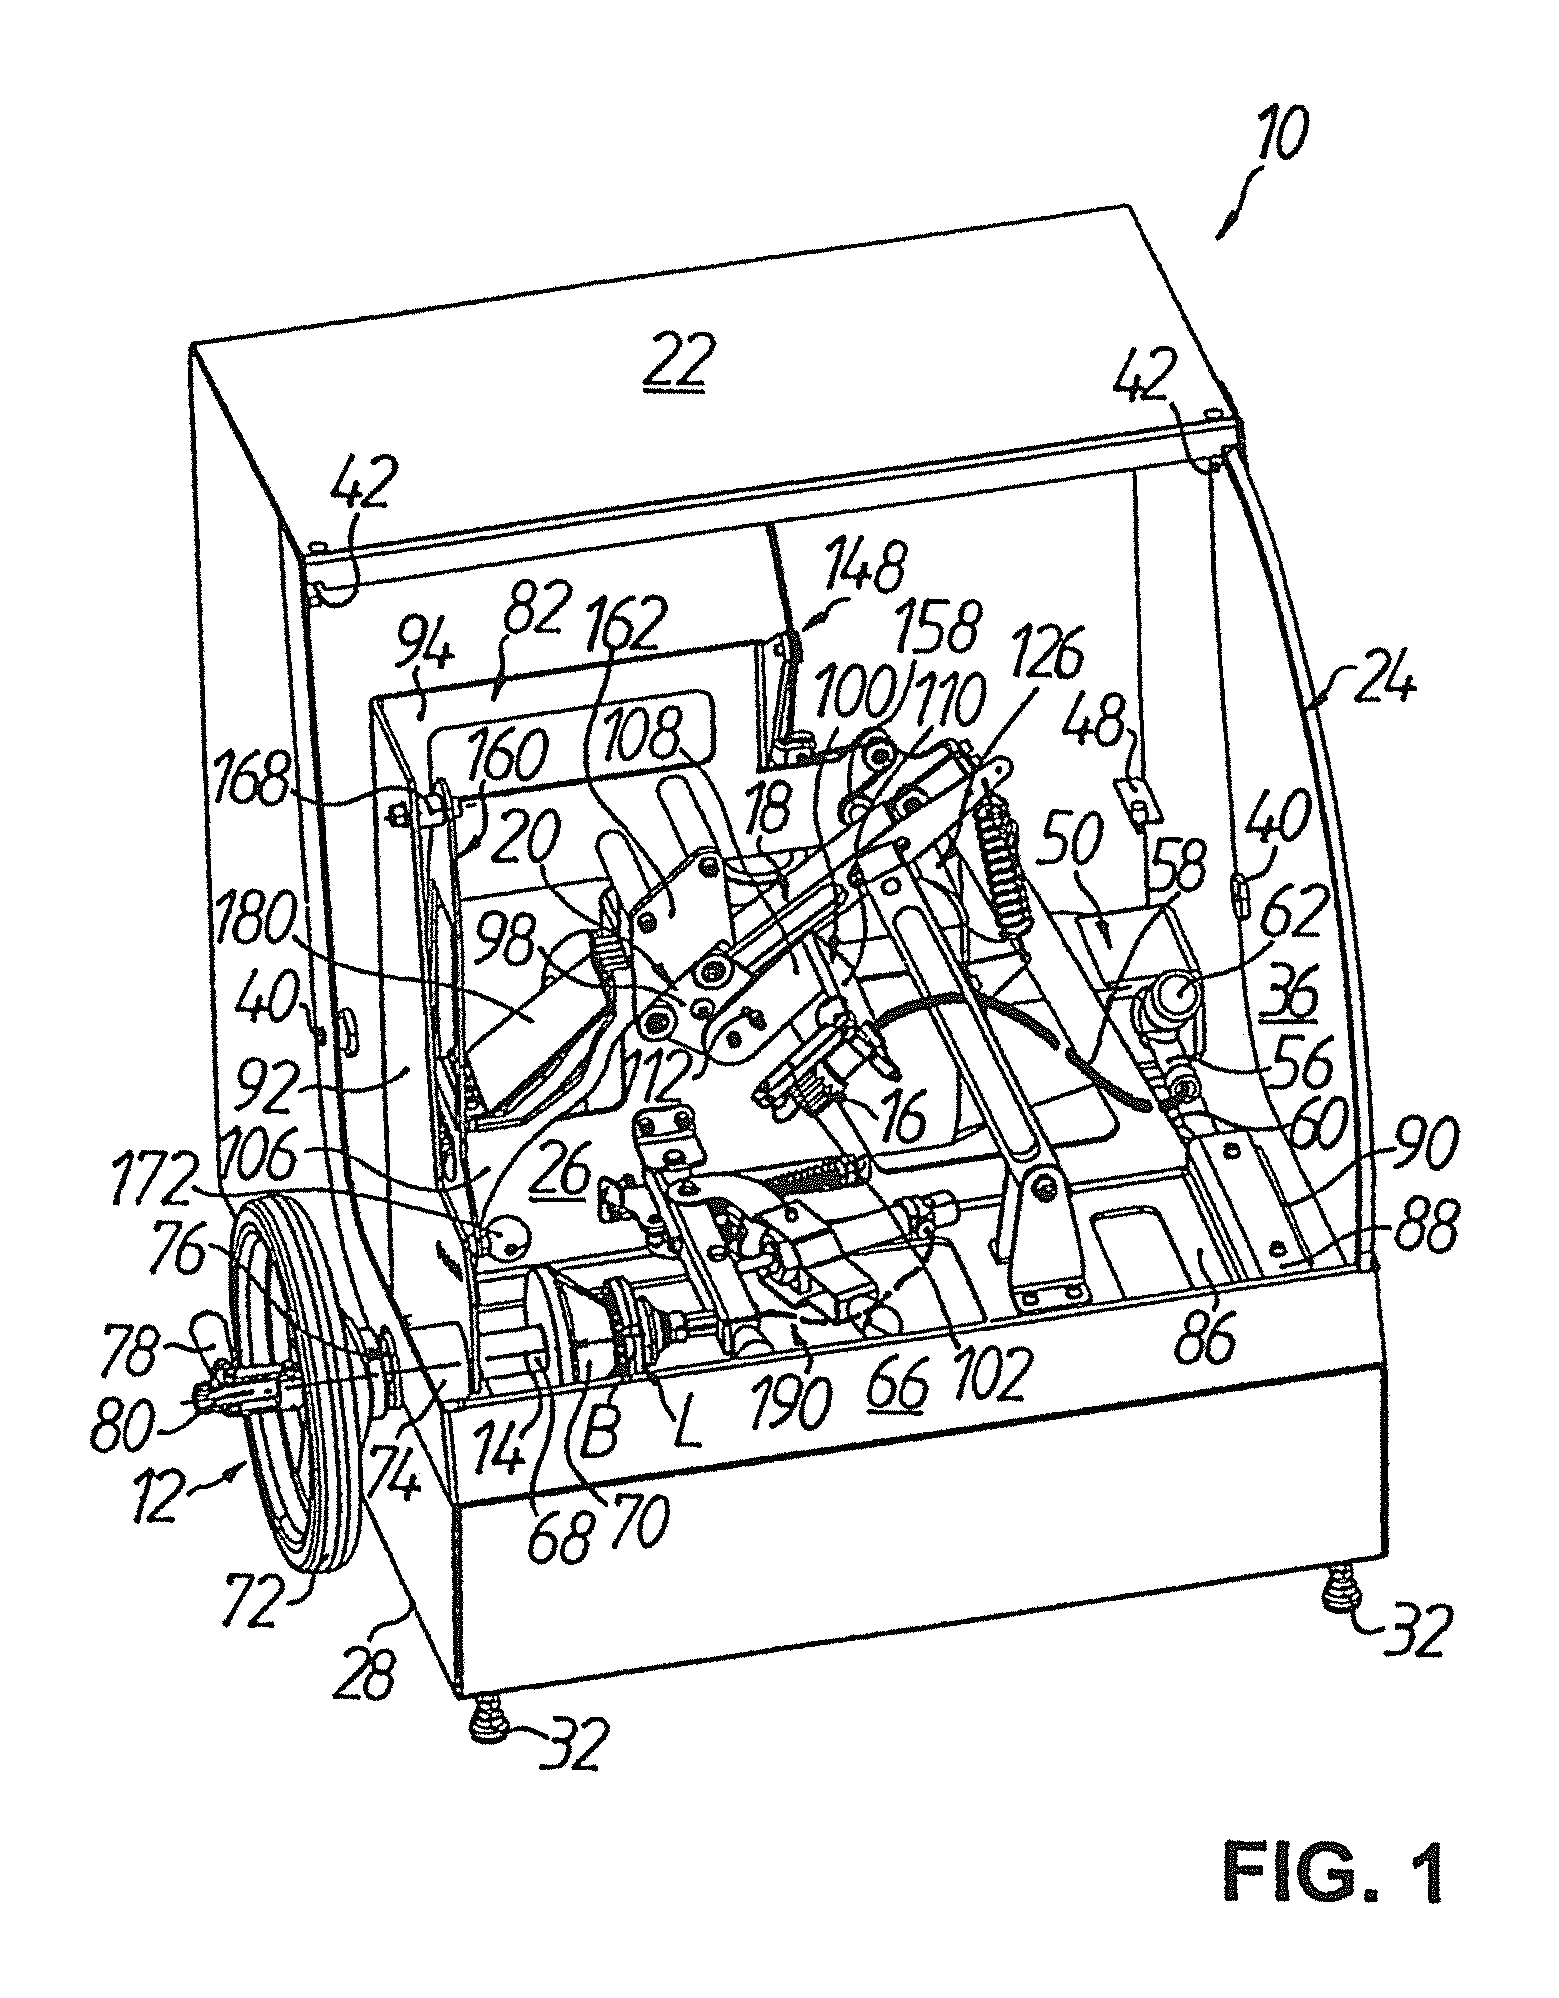 Device for deblocking optical workpieces, in particular eyeglass lenses